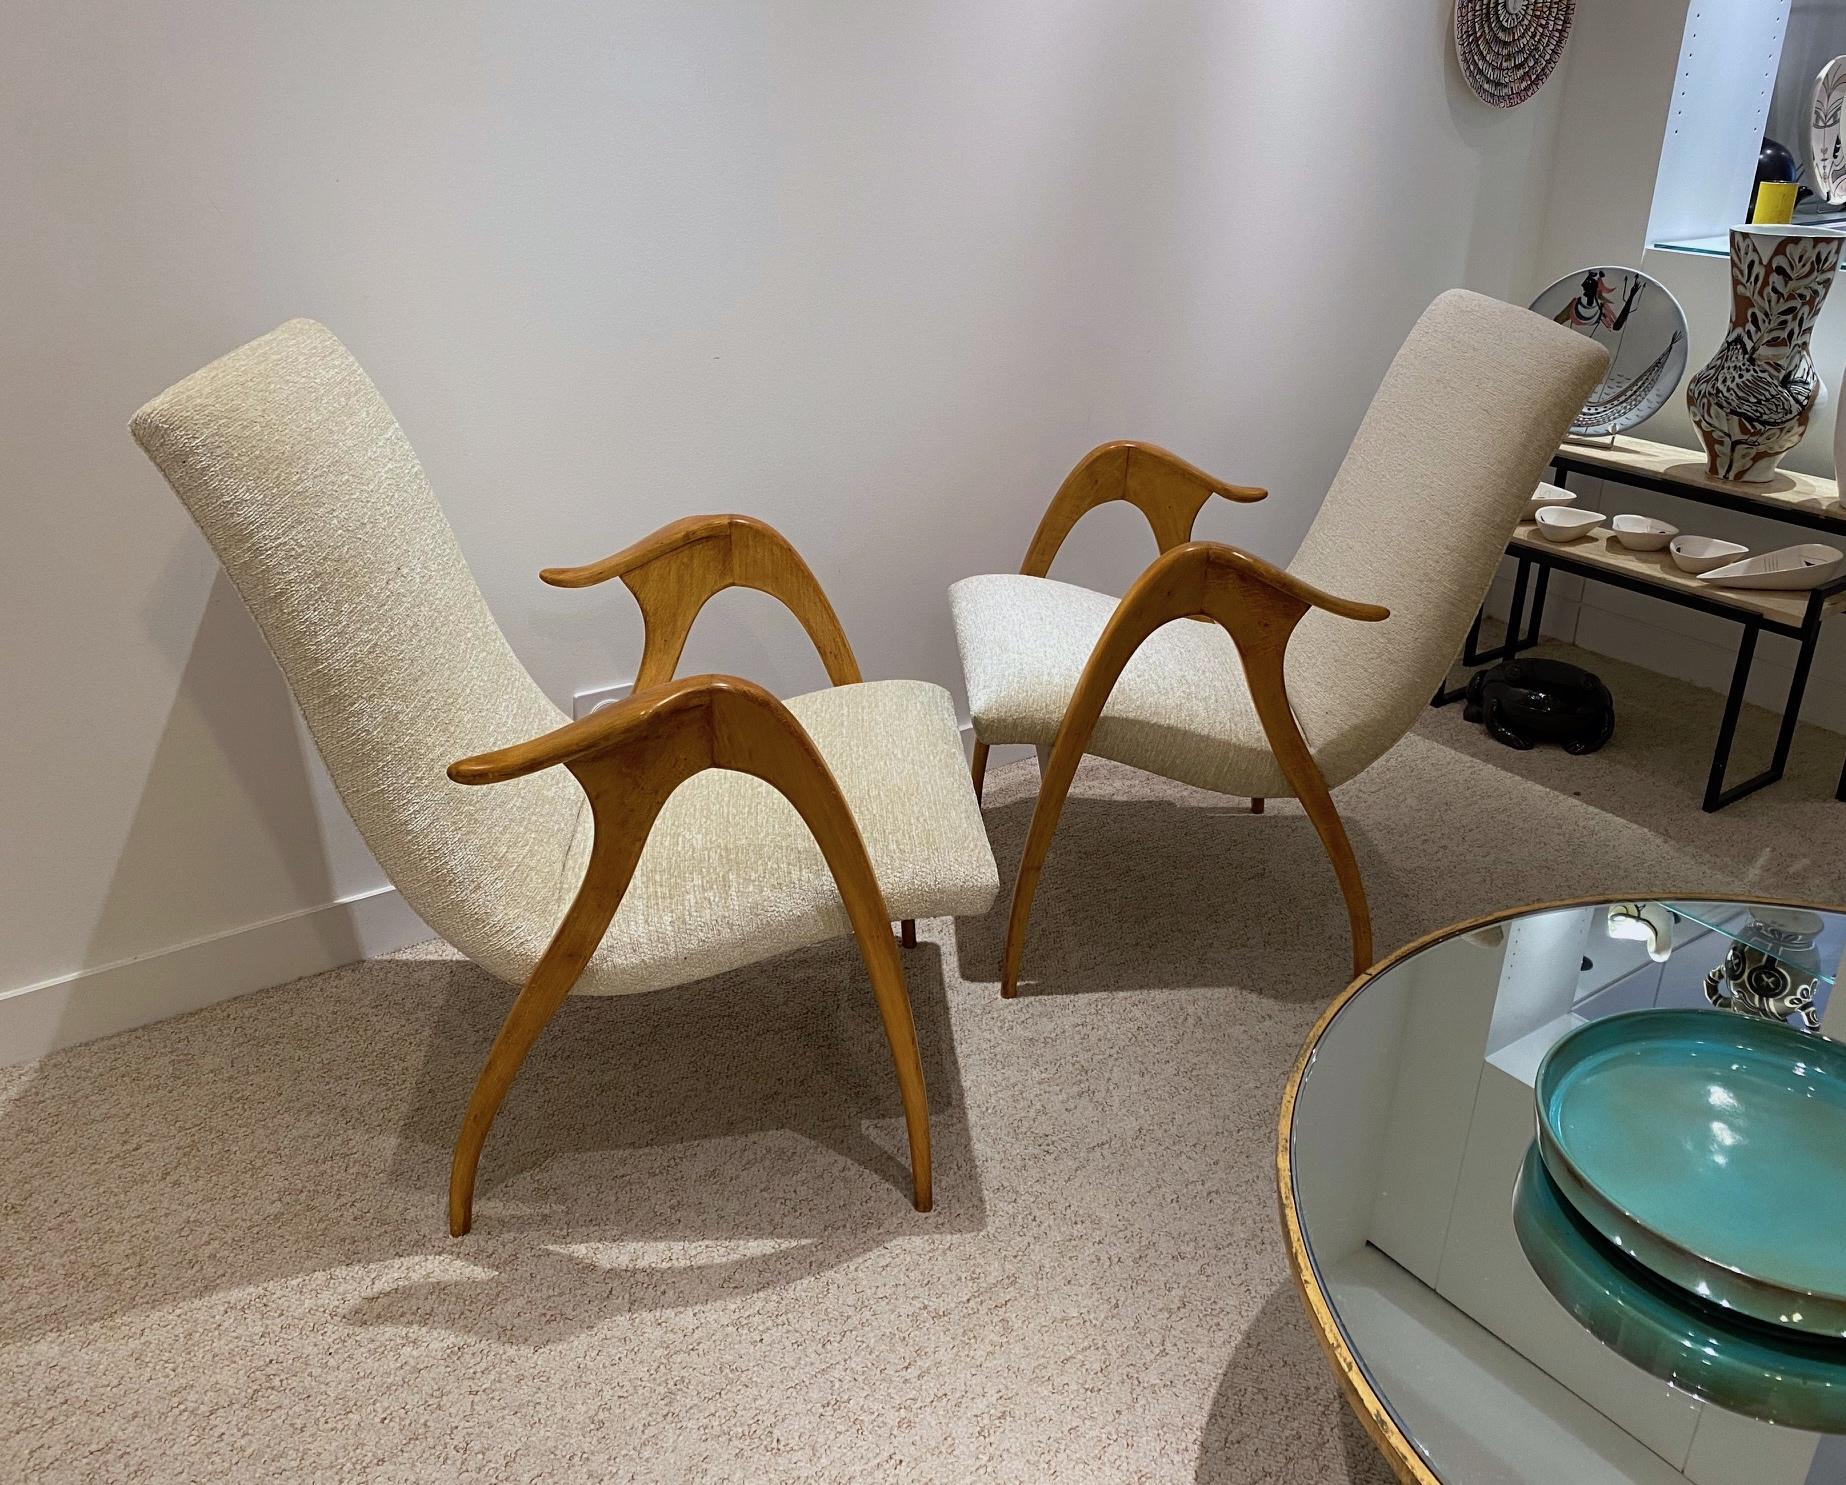 Mid-20th Century Italian Design Pair of Maple Wood Chairs by Malatesta and Masson, Italy, 1950s